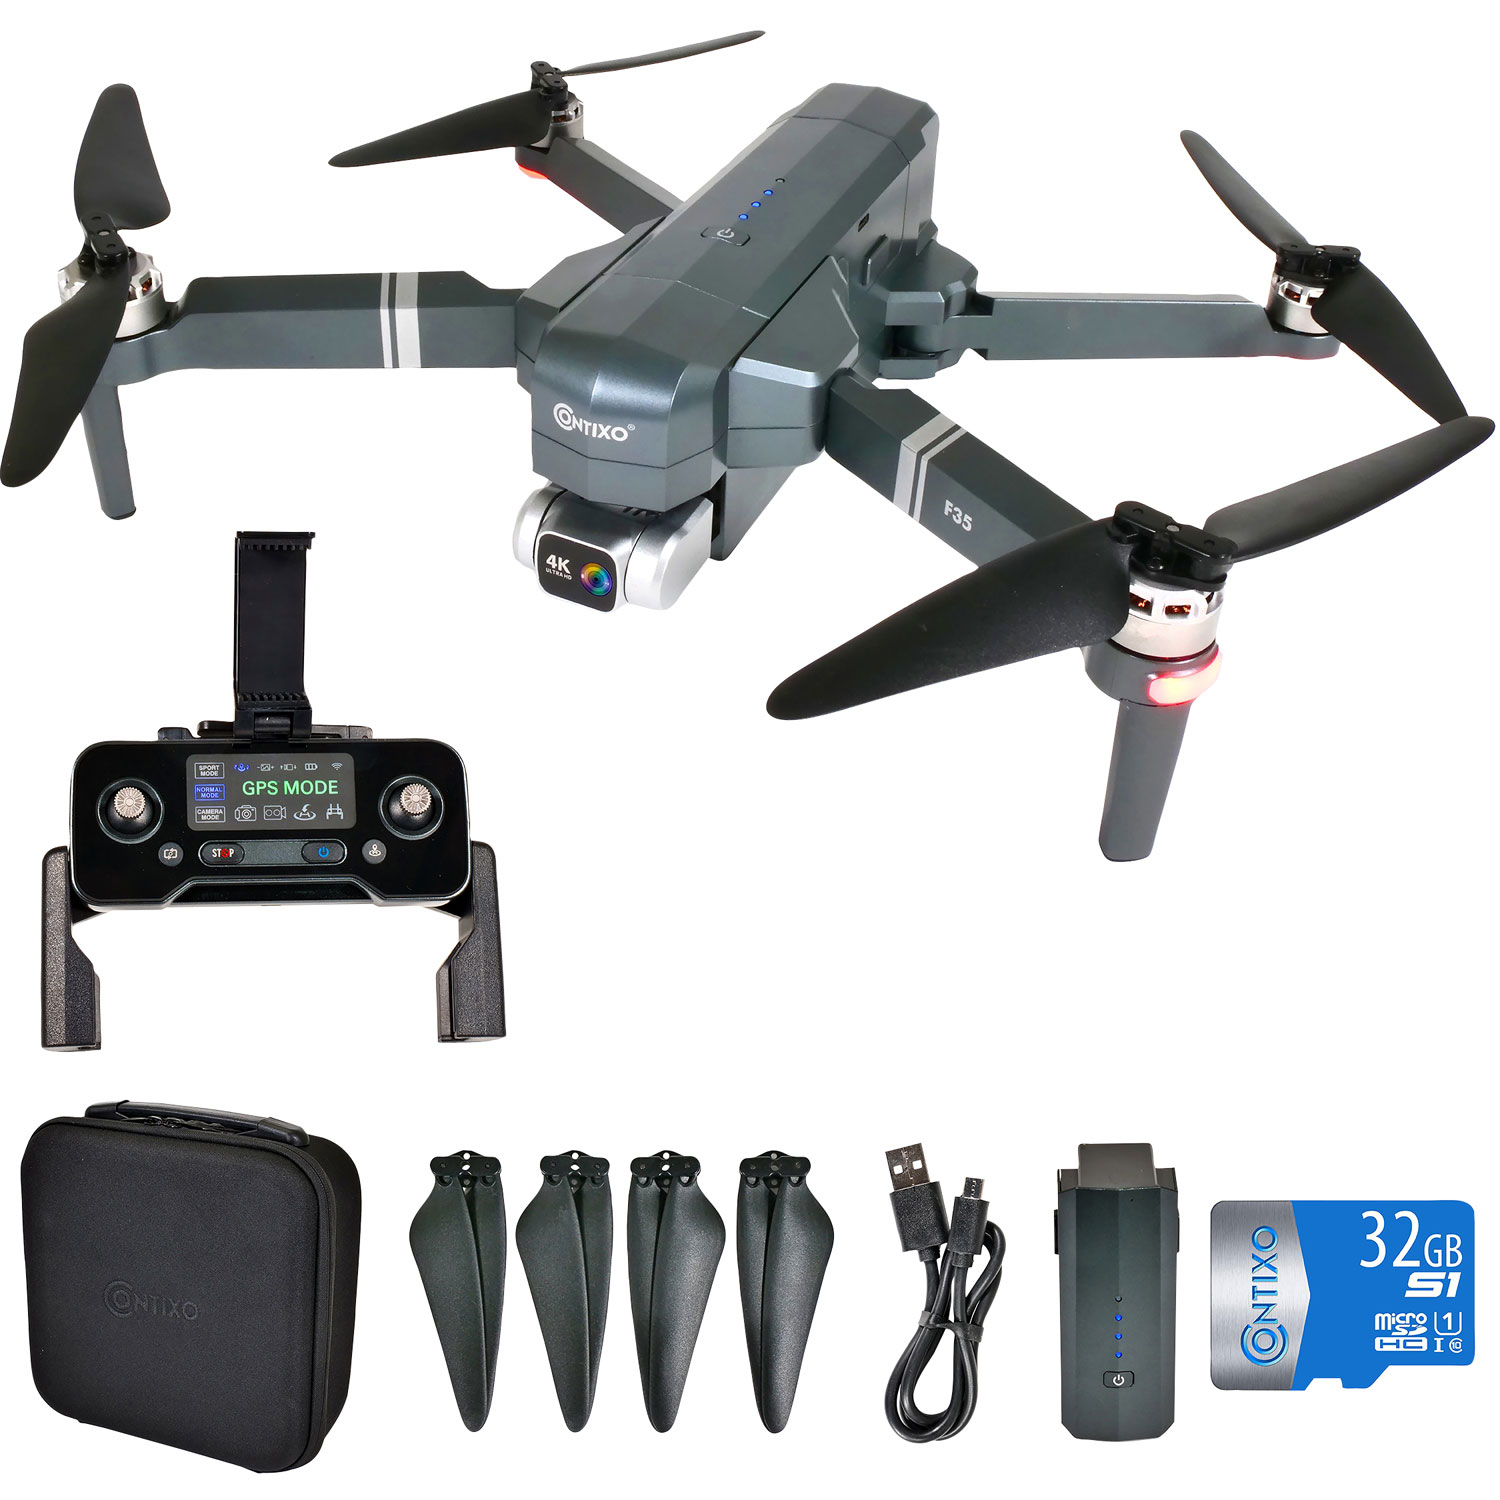 Contixo F35 Quadcopter Drone with Camera & Controller - Ready-to-Fly - Grey - Only at Best Buy